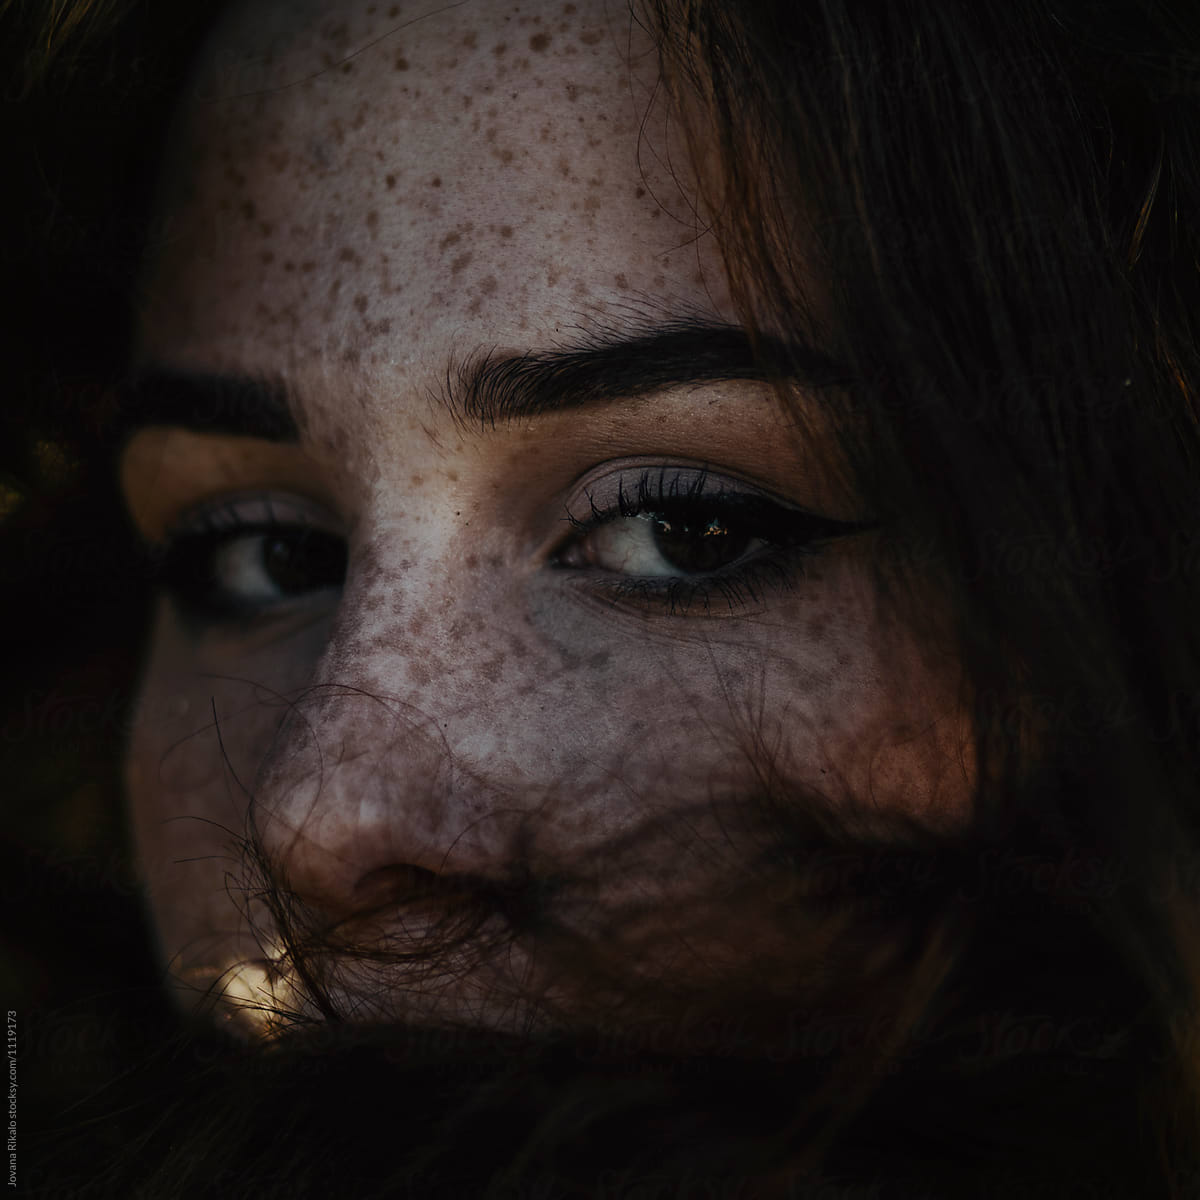 Artistic Portrait Of A Young Woman With Freckles By Stocksy Contributor Jovana Rikalo Stocksy 